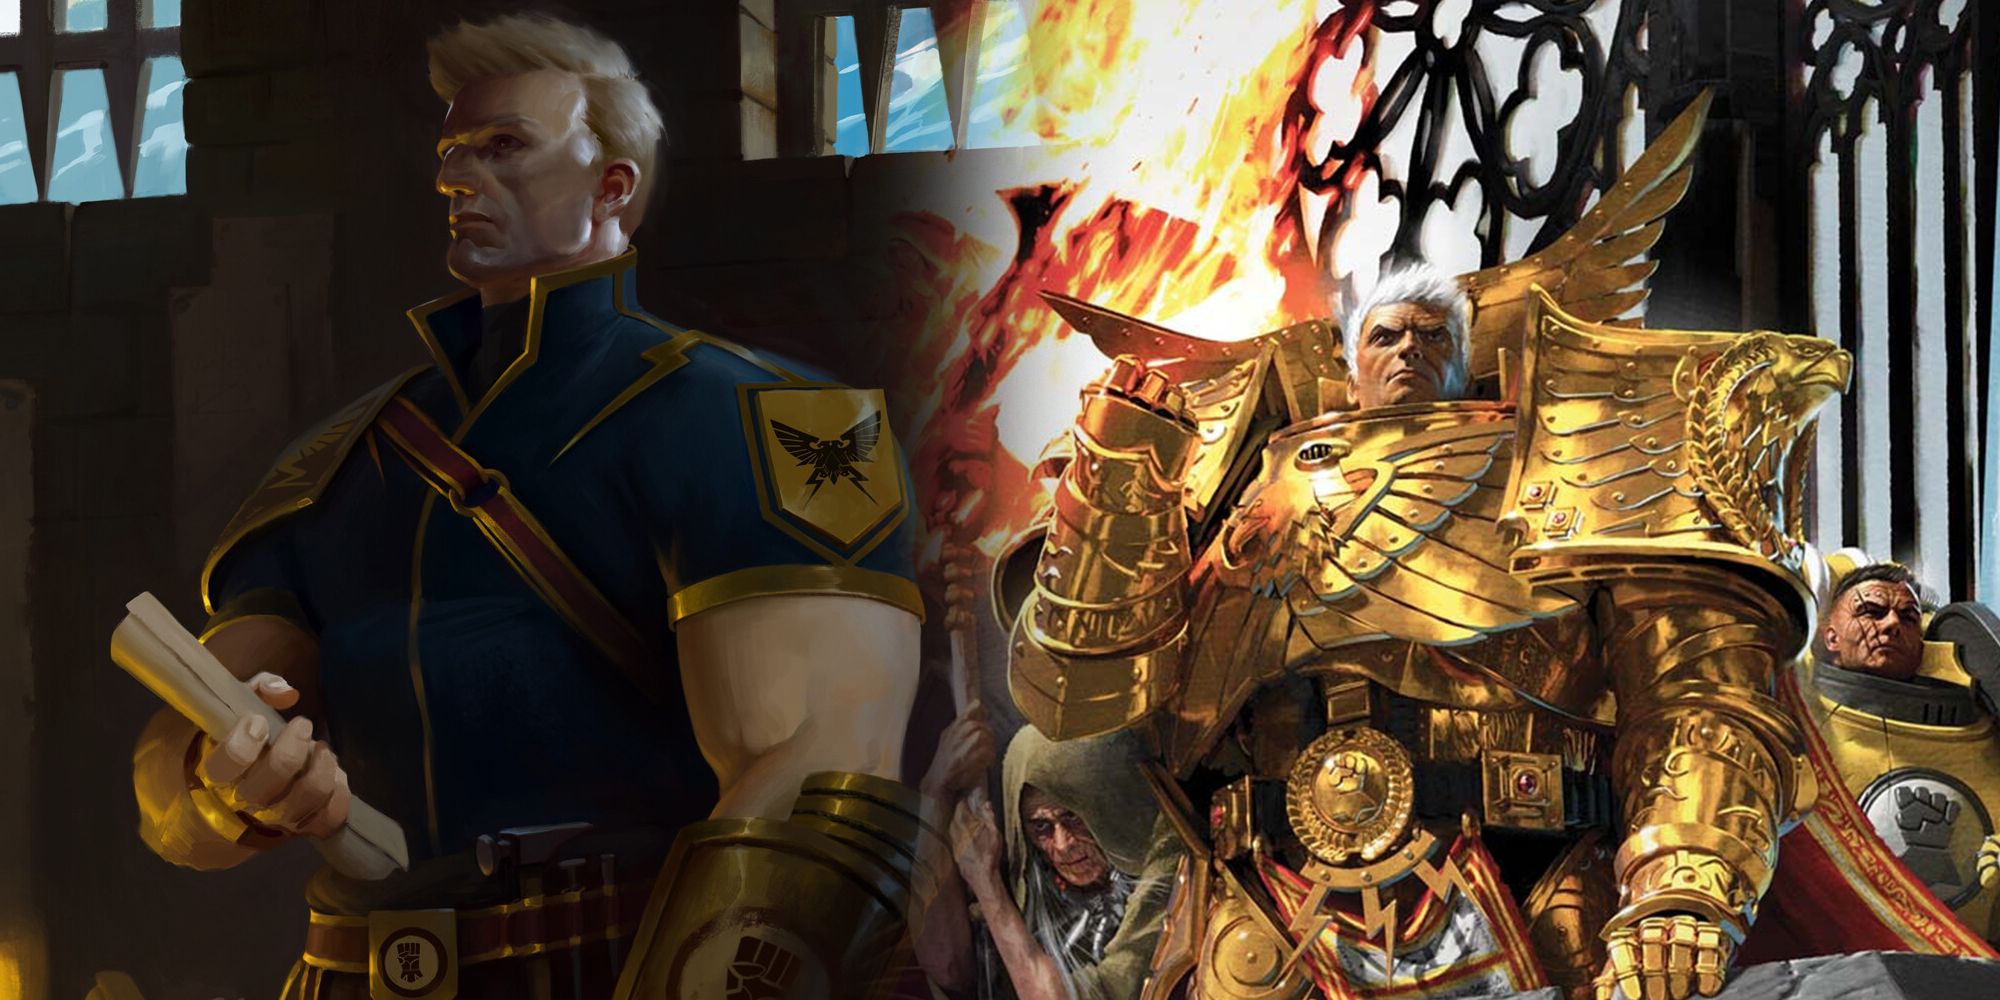 Warhammer 40k - Showing Rogul Dorn In Armor And Without It